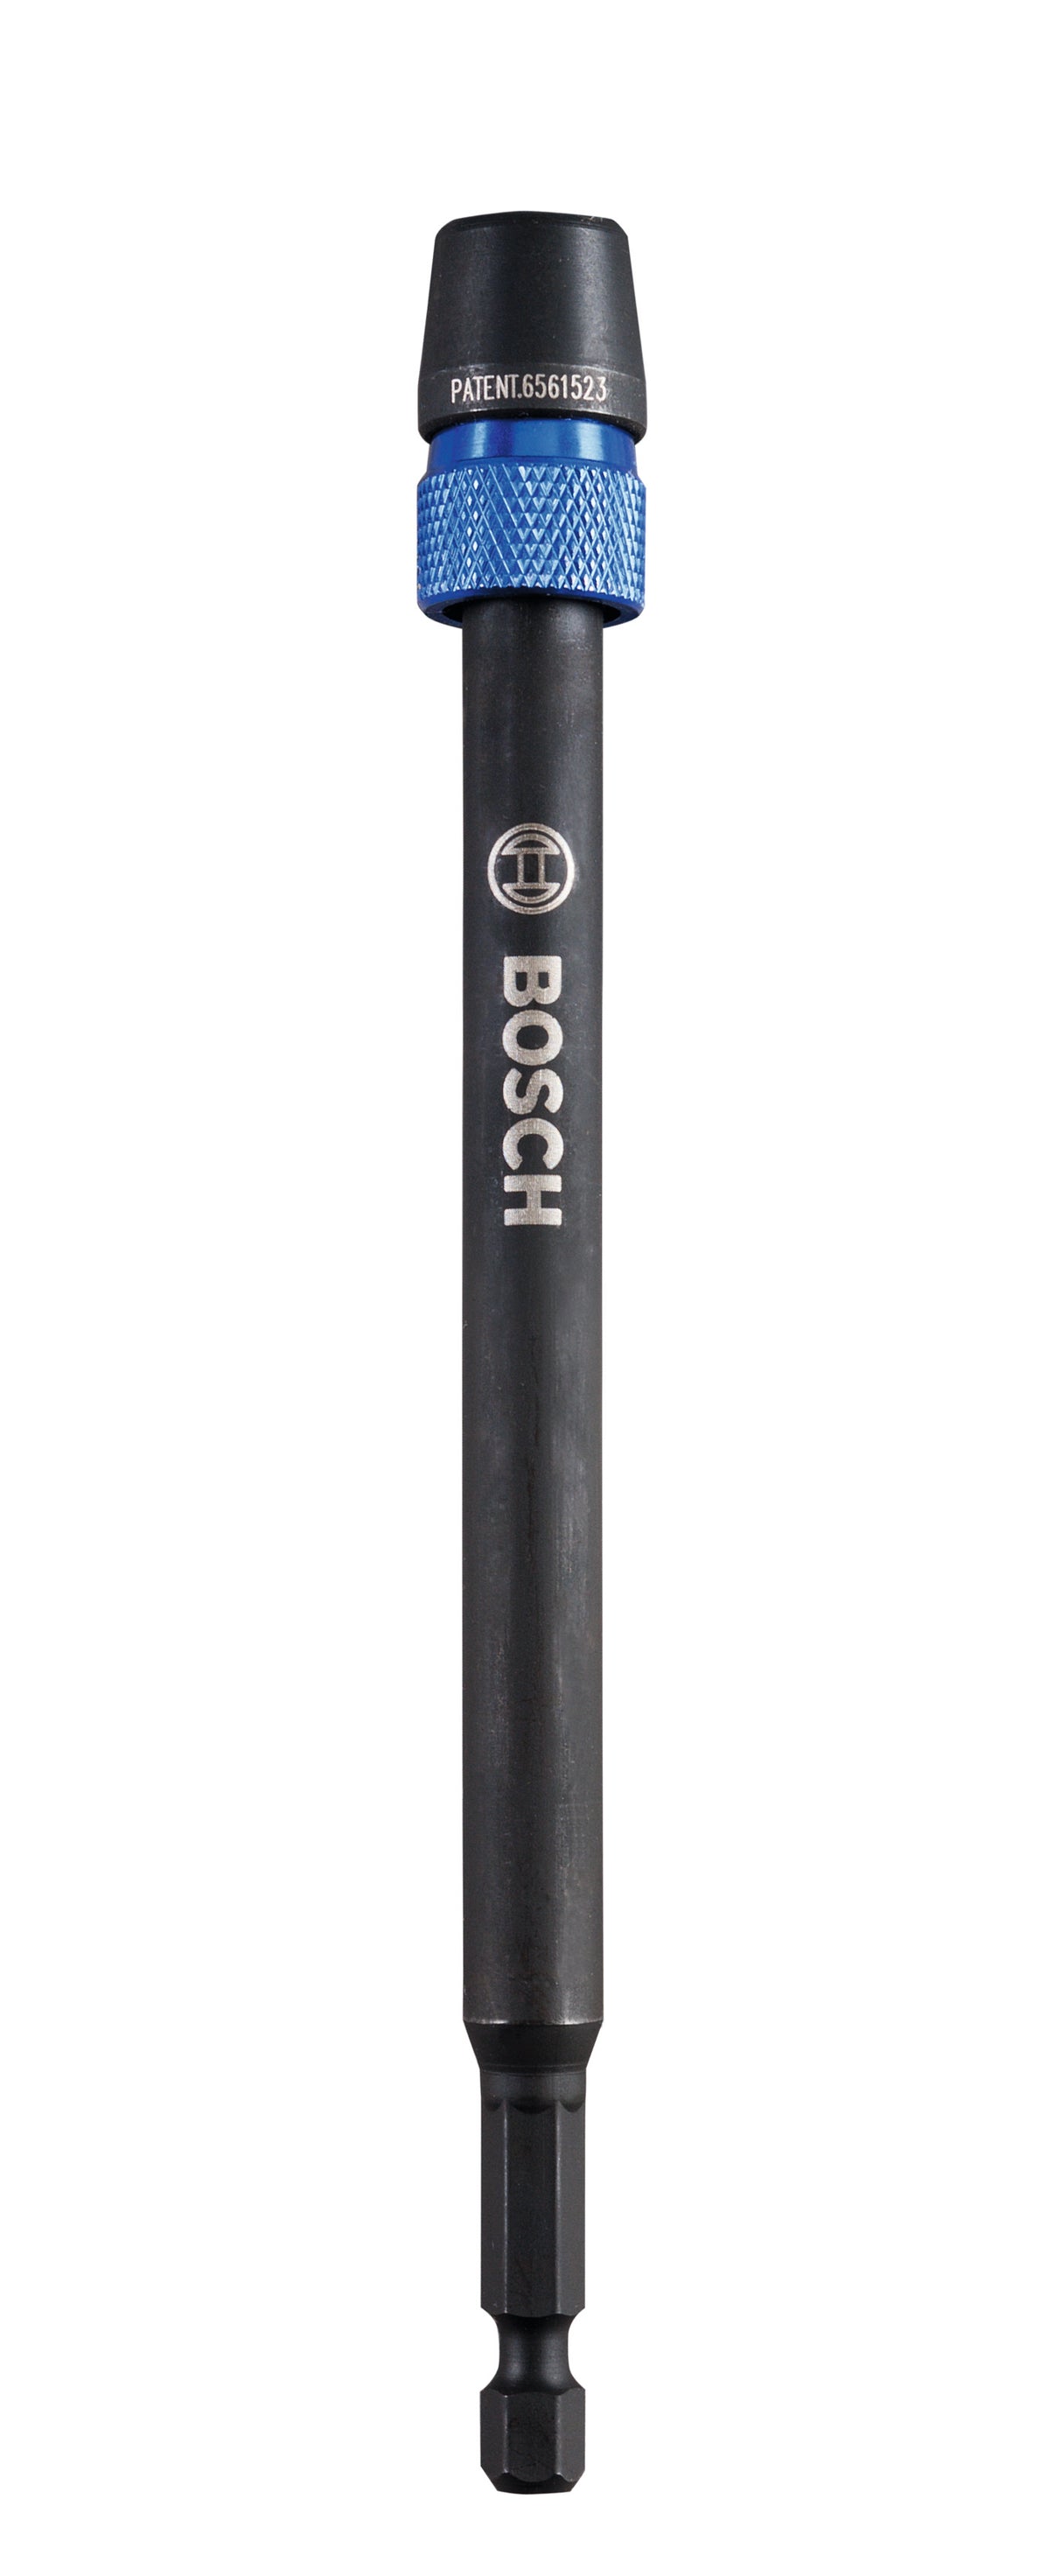 Bosch Professional Quick-Change 1/4" Hex Shank Extension for Self Cut Speed Spade Bits - 305mm